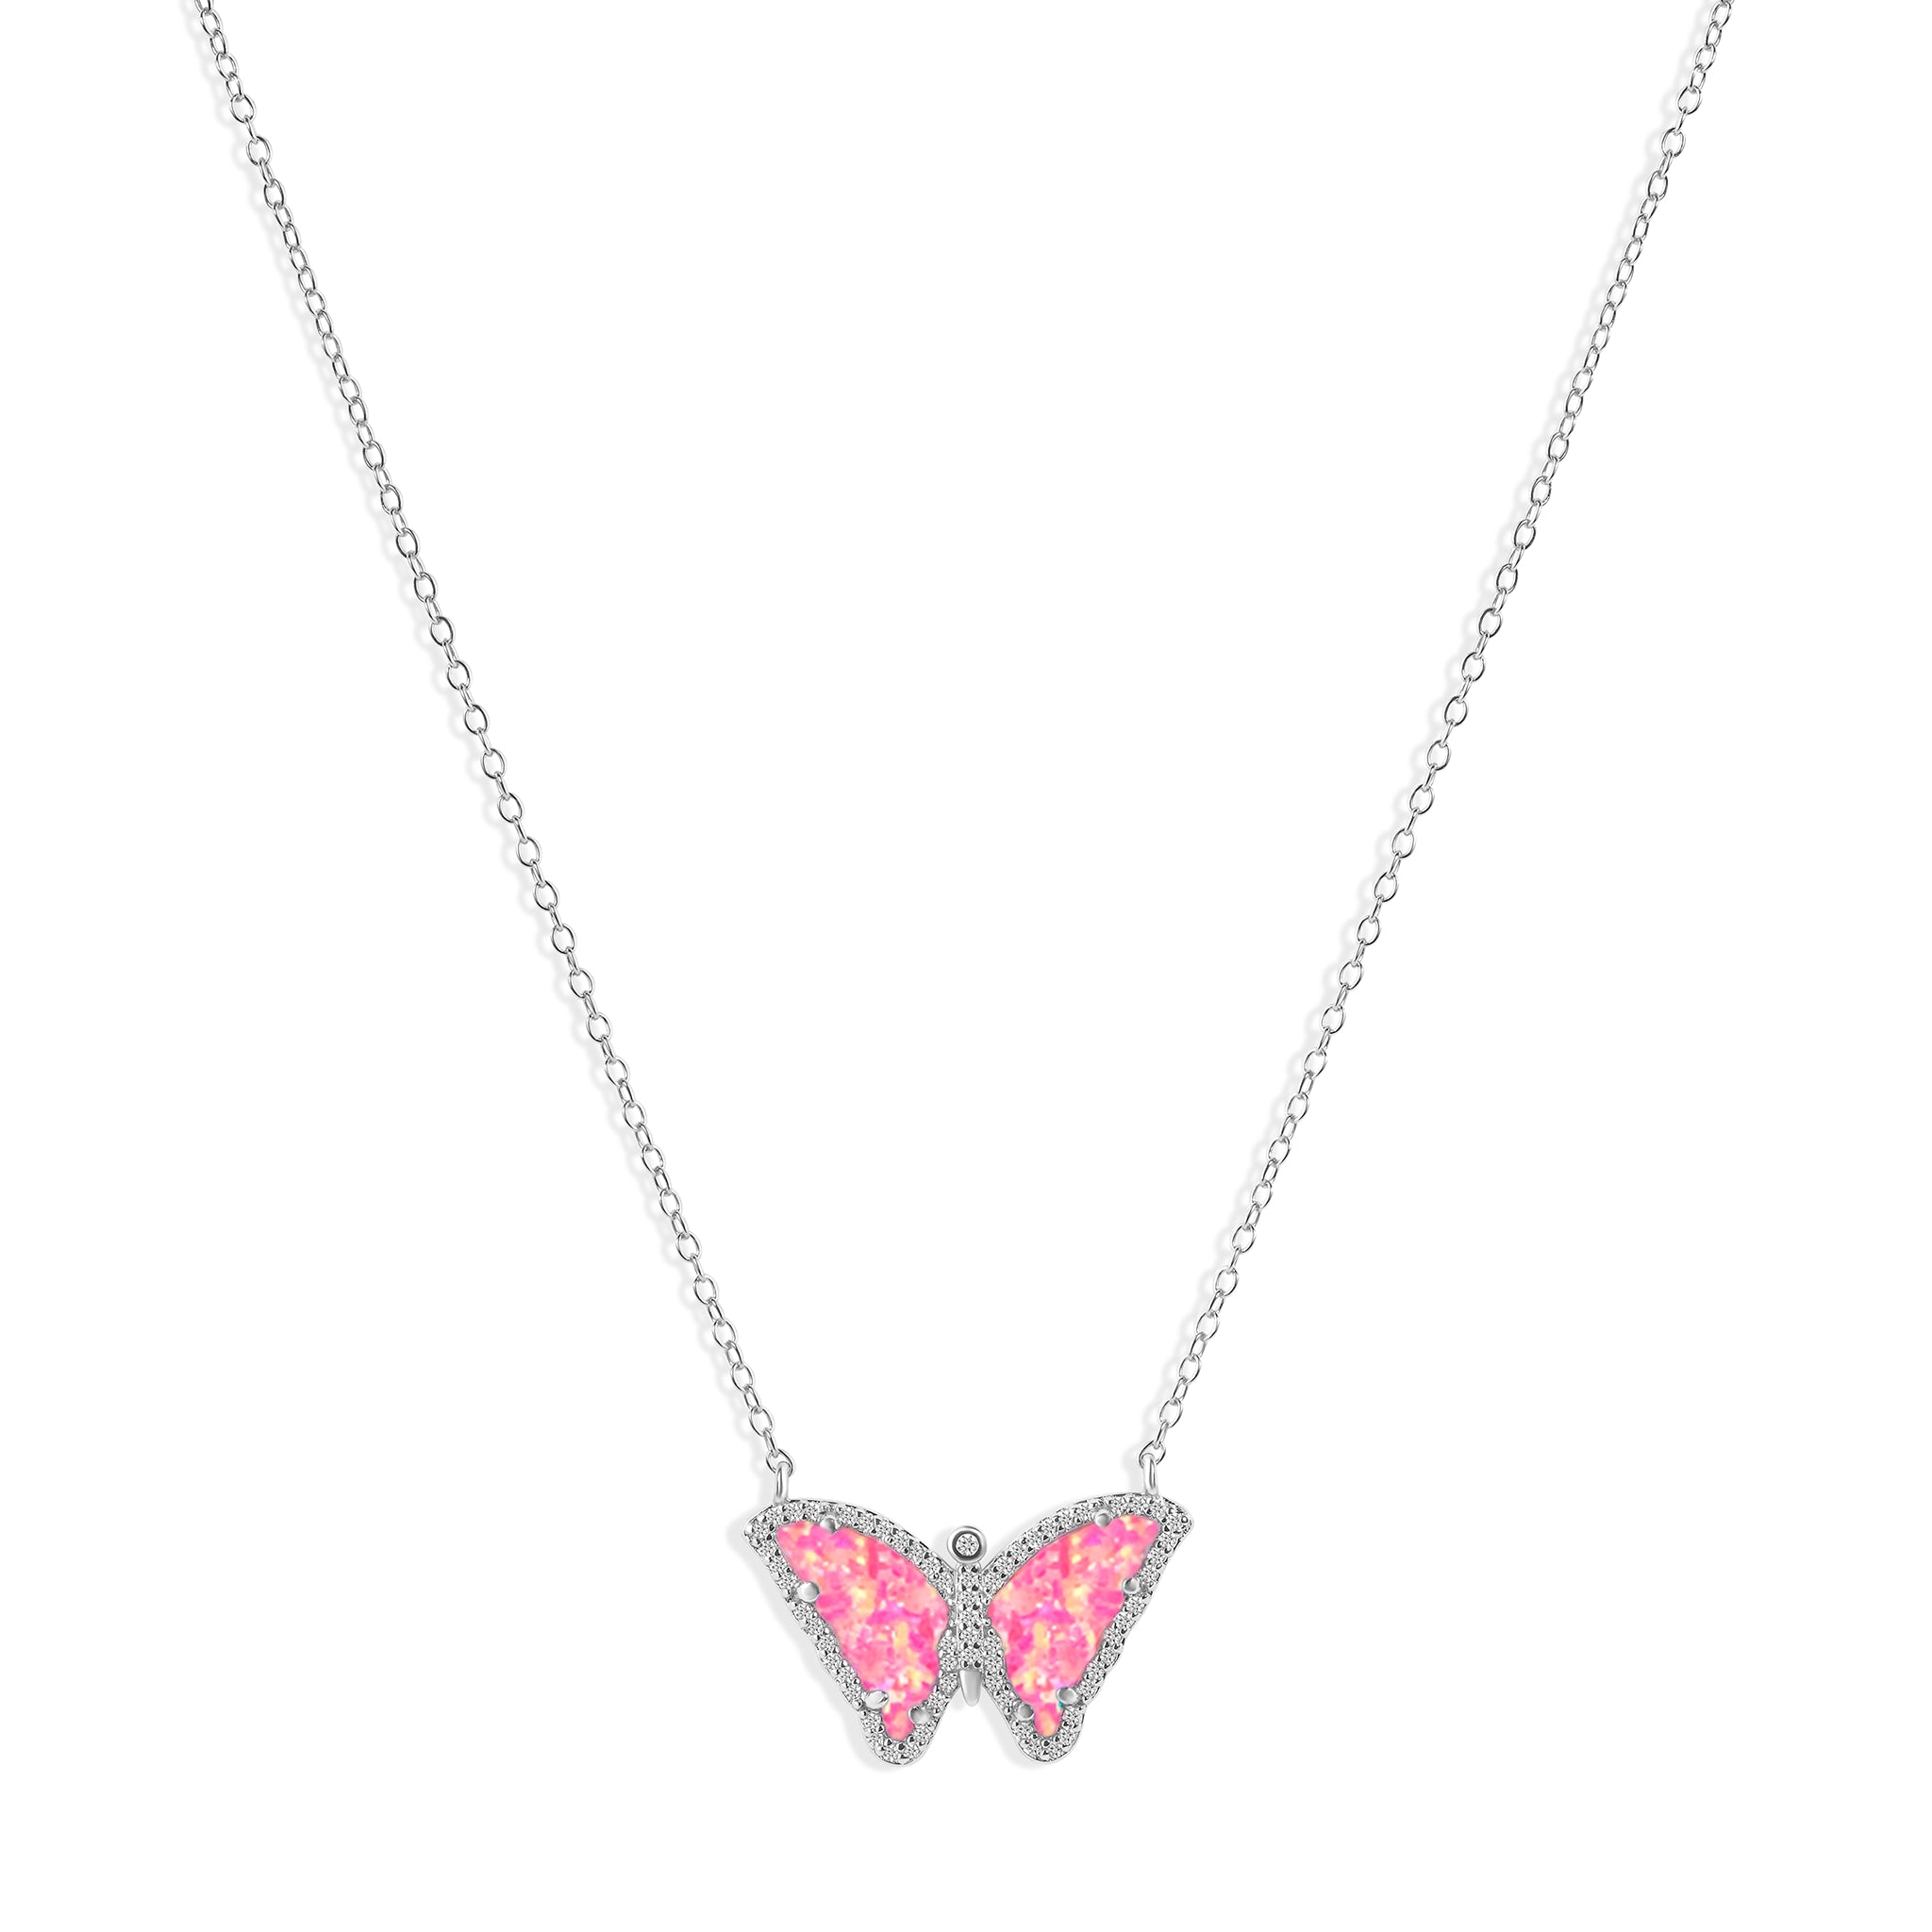 Isabella Classic Butterfly Necklace N315 in Sterling Silver